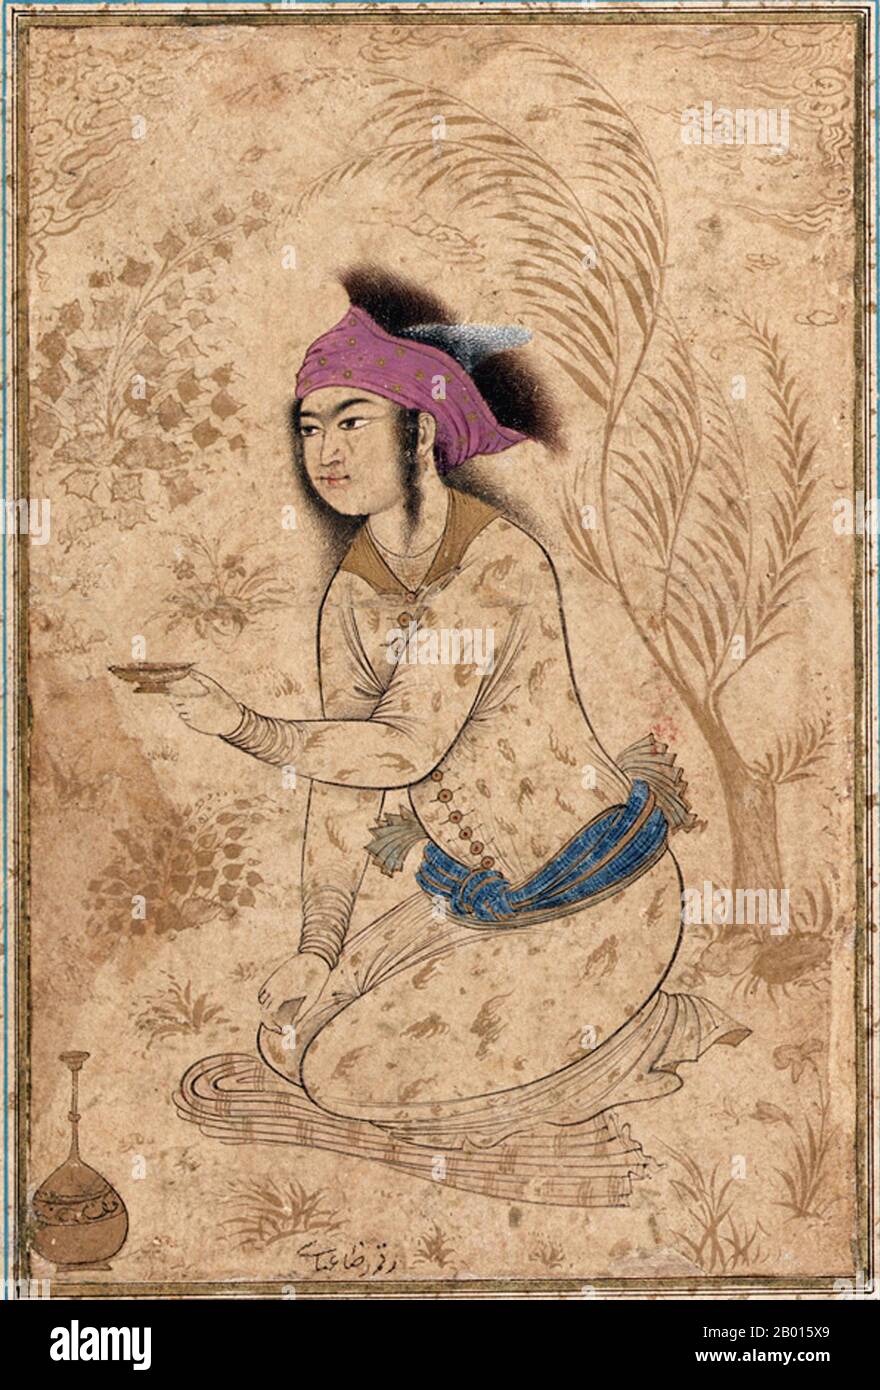 Iran: A youth kneeling and proffering a wine cup. Watercolour painting by Riza Abbasi (1565-1635), early 17th century.  Riza Abbasi, Riza yi-Abbasi or Reza-e Abbasi, also Aqa Riza or Āqā Riżā Kāshānī (c. 1565–1635) was the leading Persian miniaturist of the Isfahan School during the later Safavid period, spending most of his career working for Shah Abbas I (r.1587-1629). He is considered to be the last great master of the Persian miniature, best known for his single miniatures for muraqqa or albums, especially single figures of beautiful youths. Stock Photo